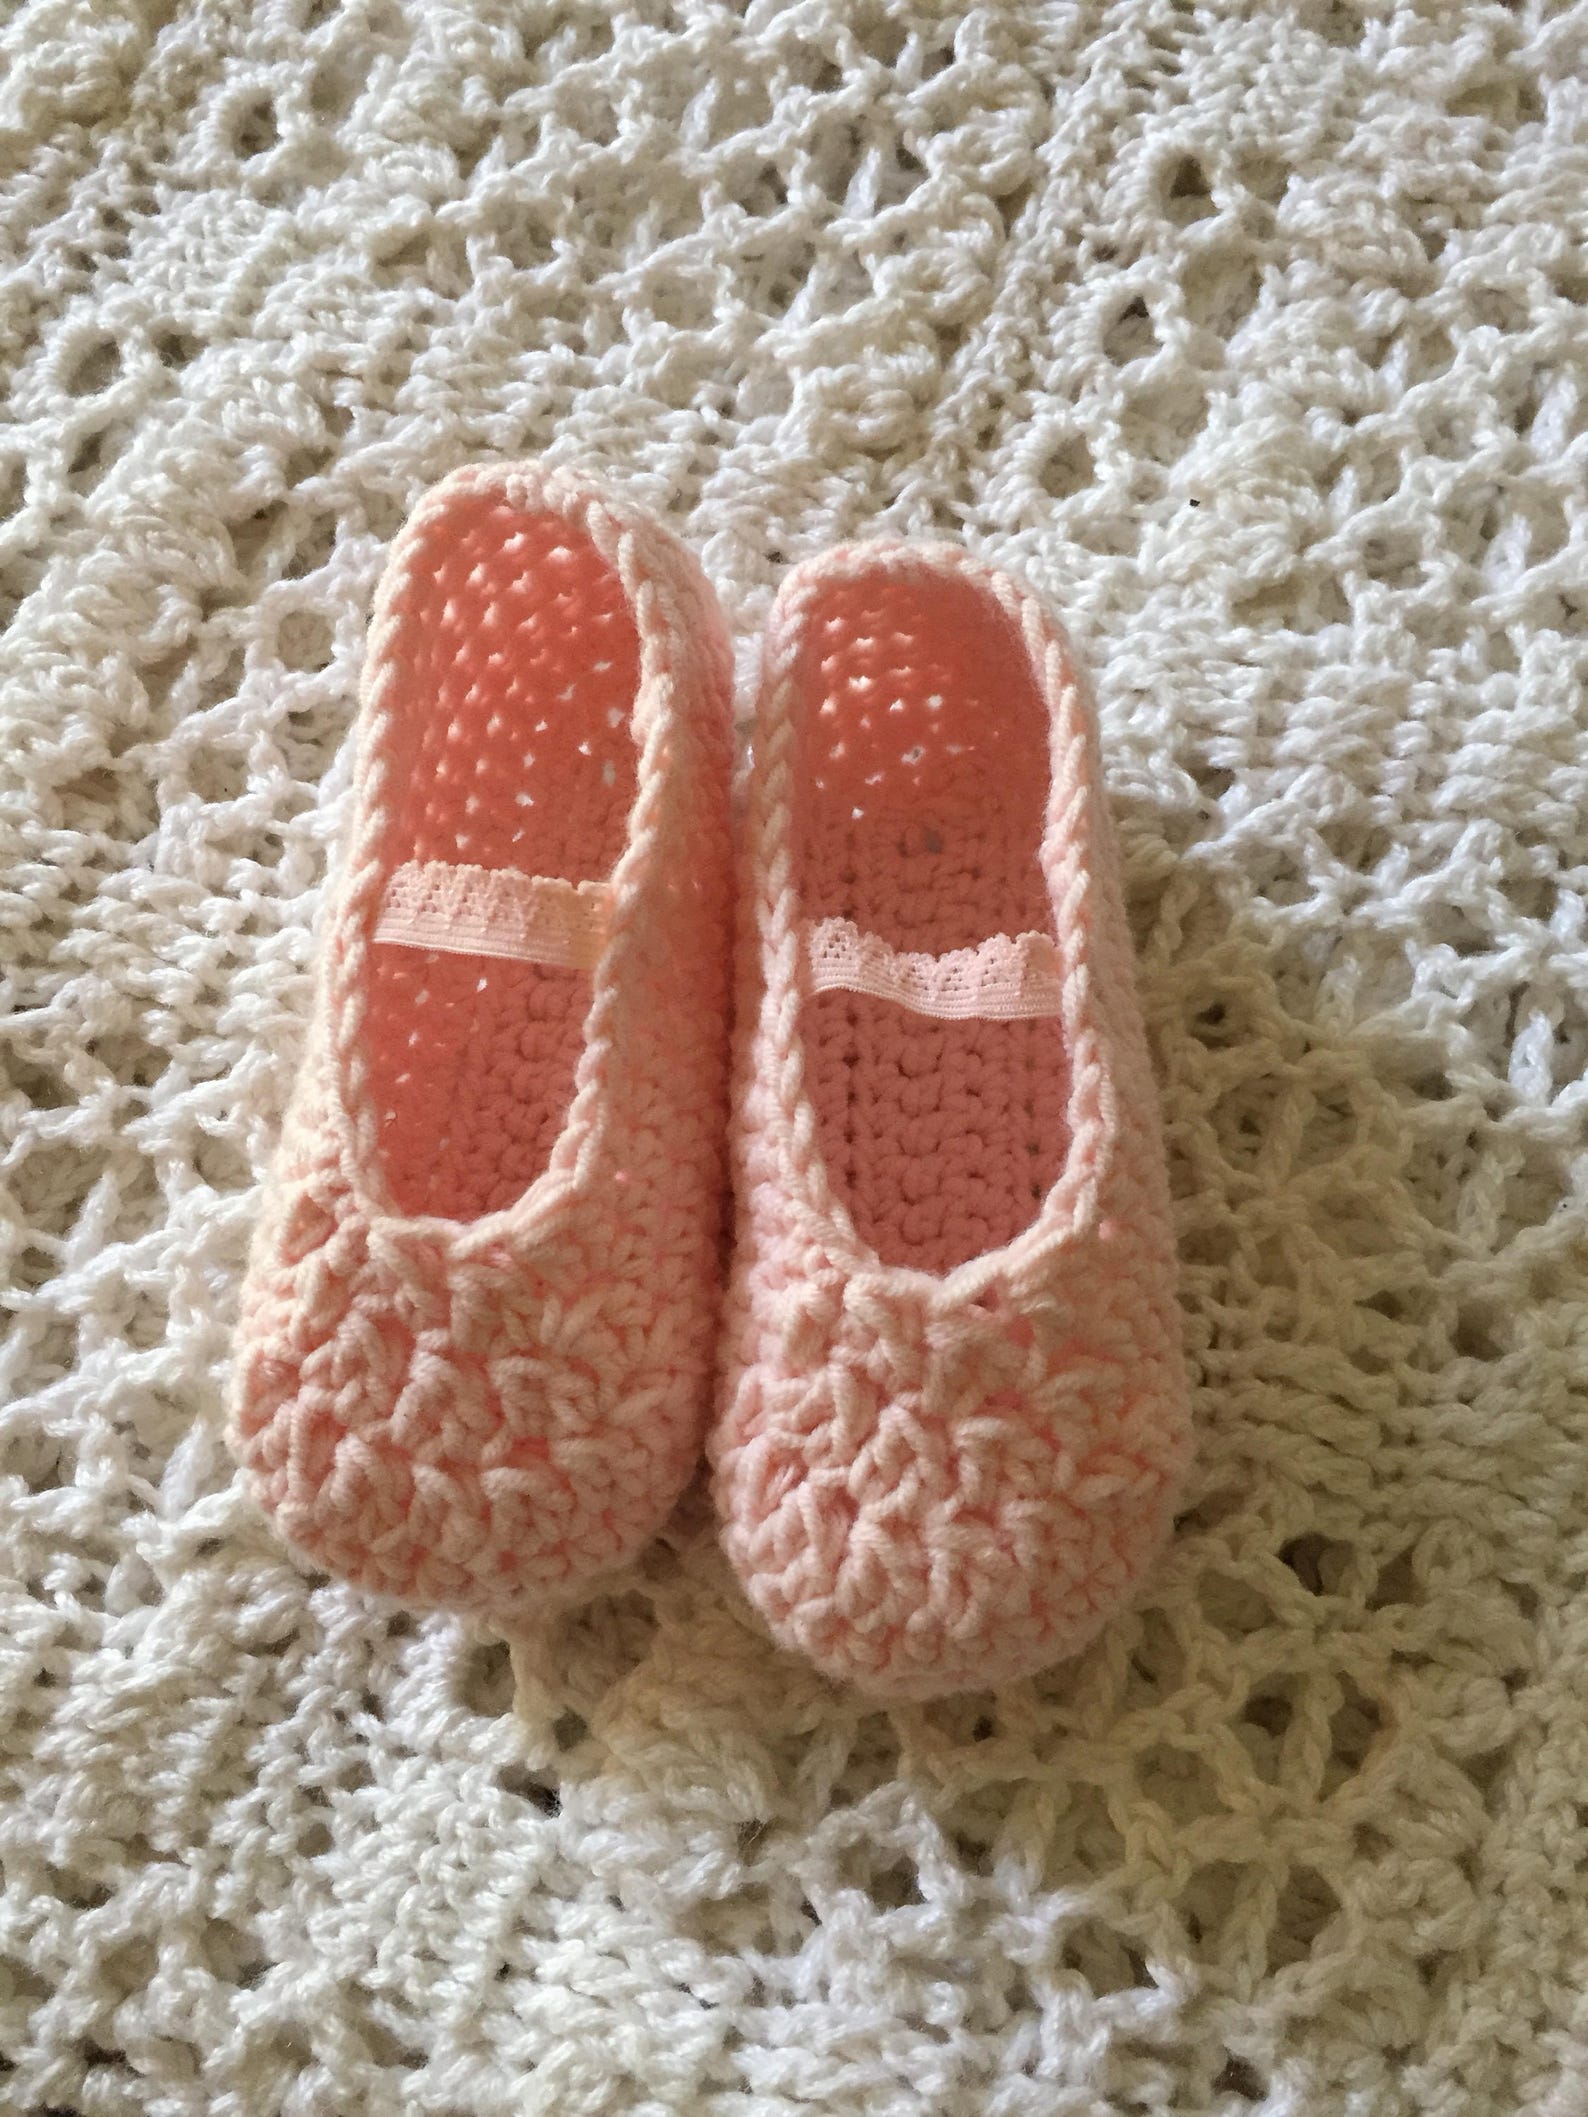 pink ballet slippers